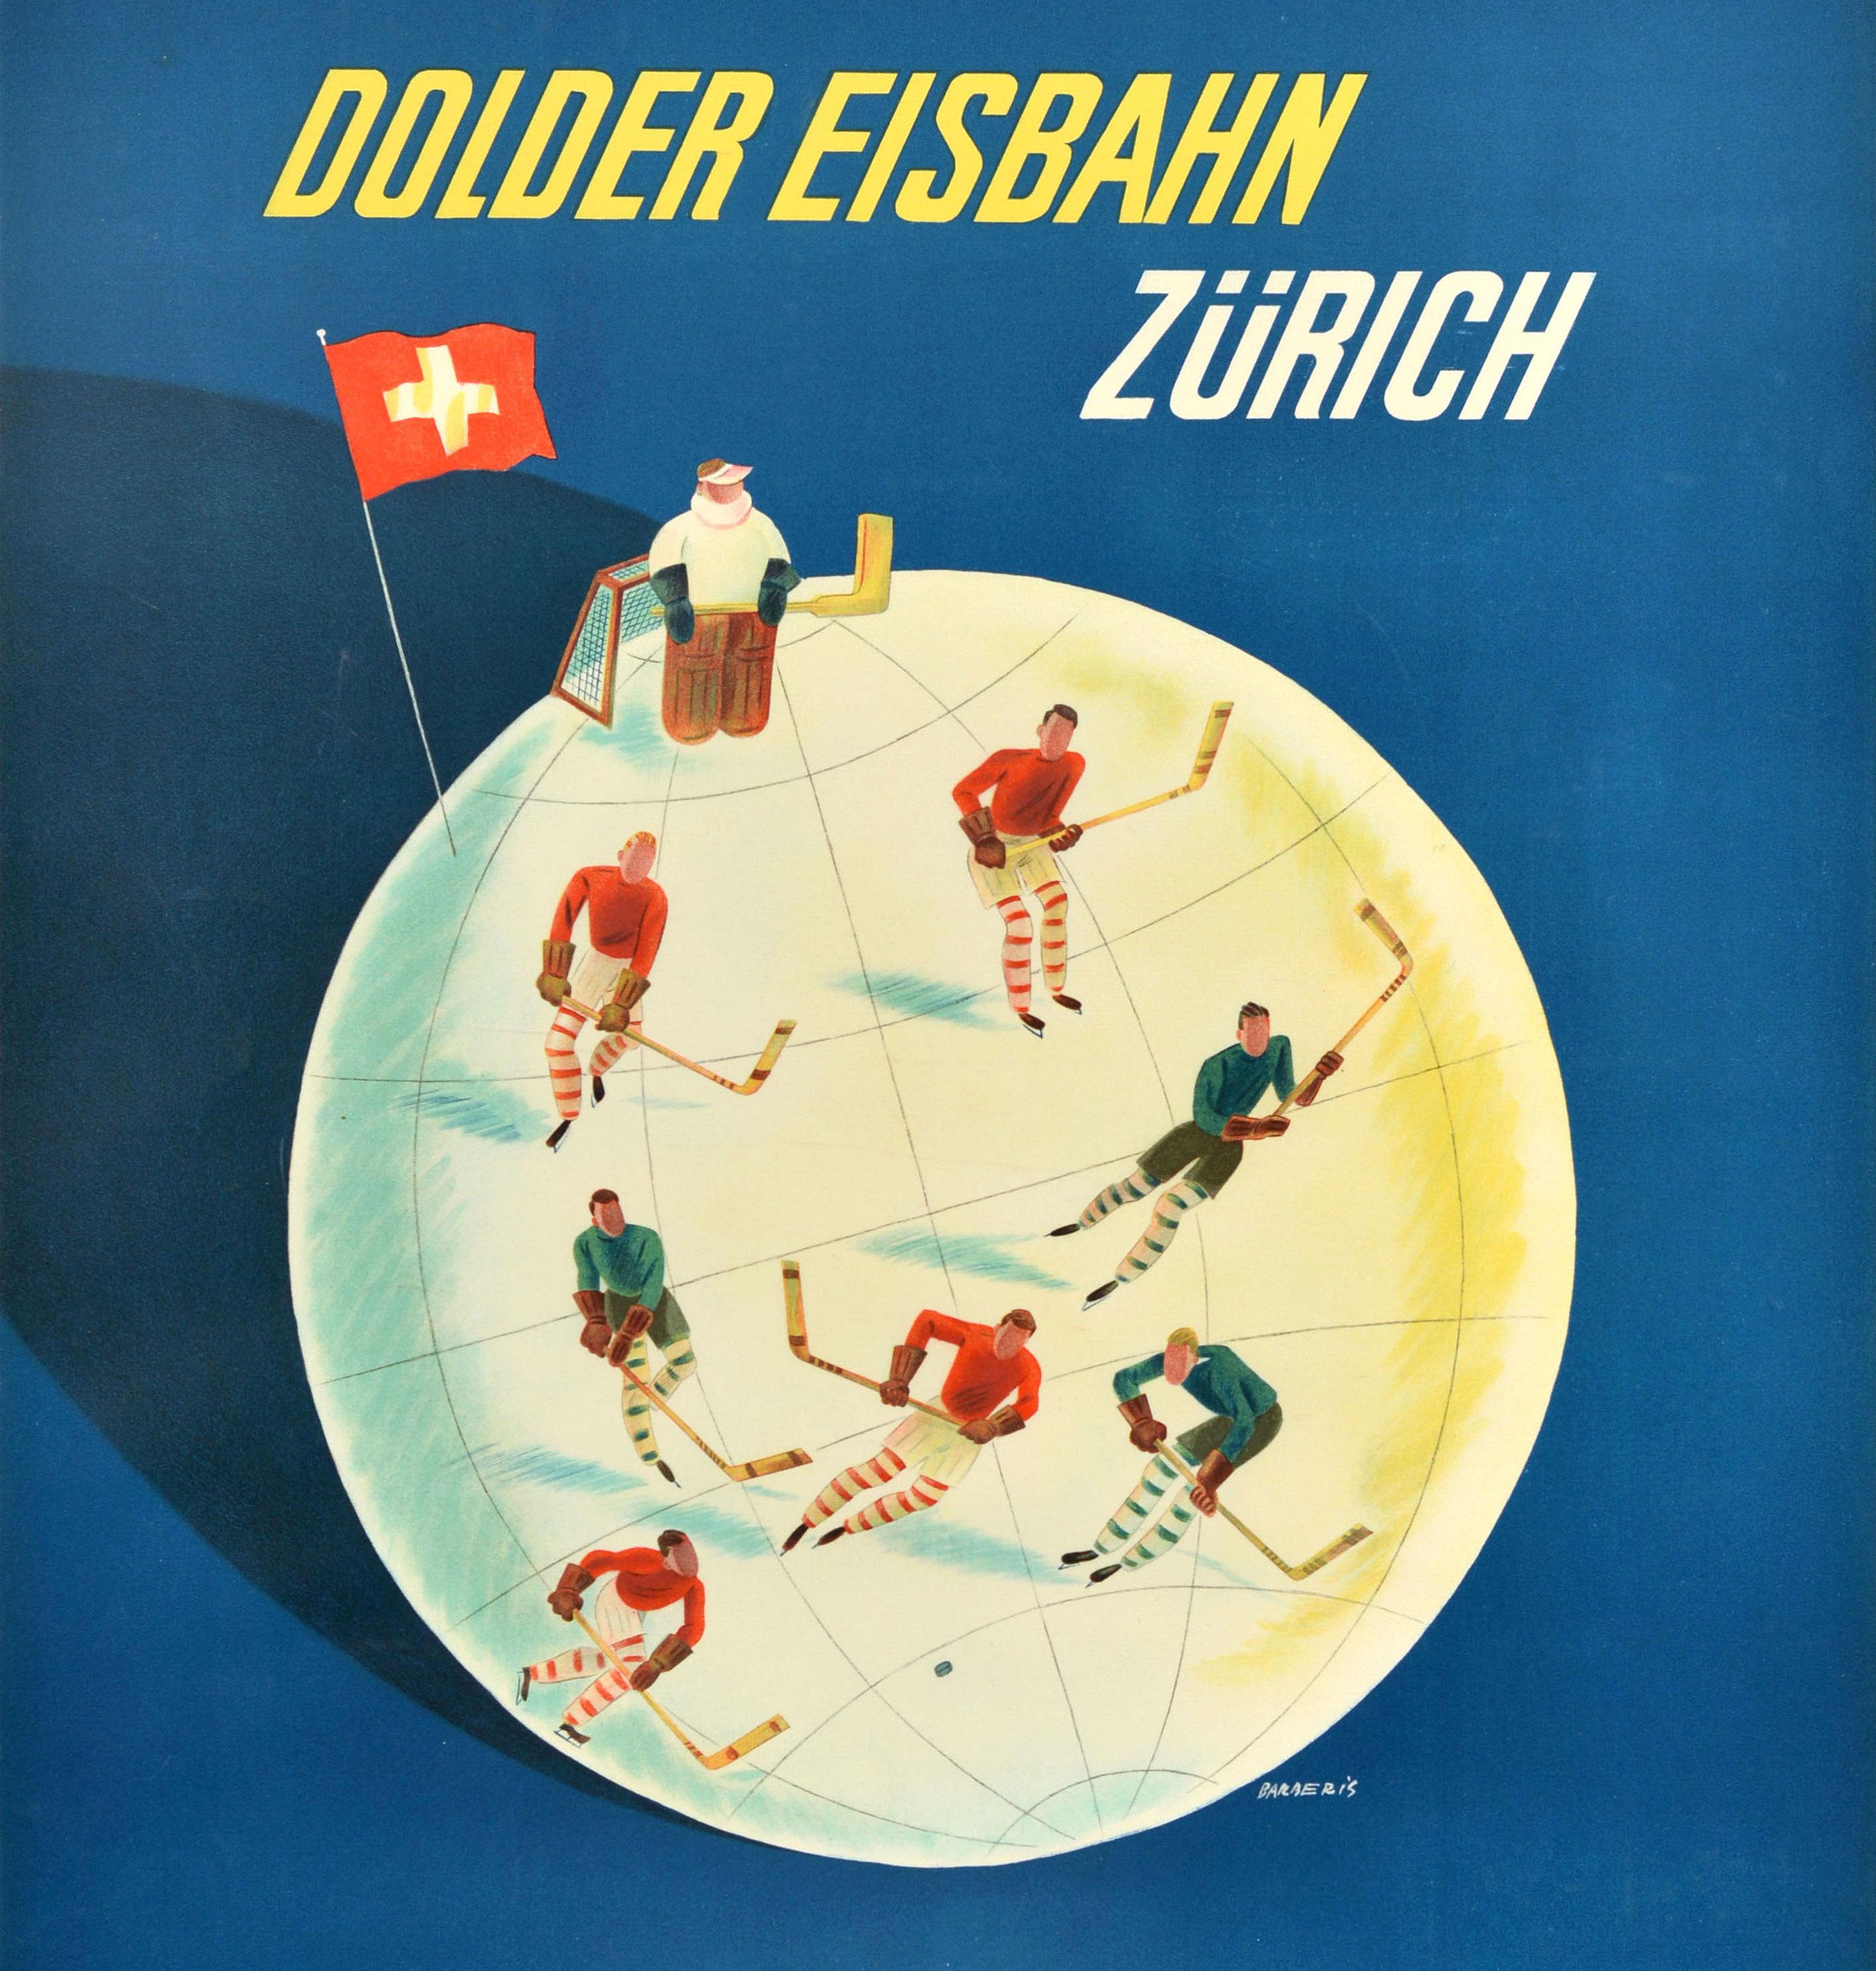 Original vintage sport poster for the Dolder Eisbahn Zurich ice skating rink open daily from 9-22:30 featuring a great design by the Swiss artist Franco Barberis (1905-1992) depicting ice hockey players on a globe of the world as the ice rink with a